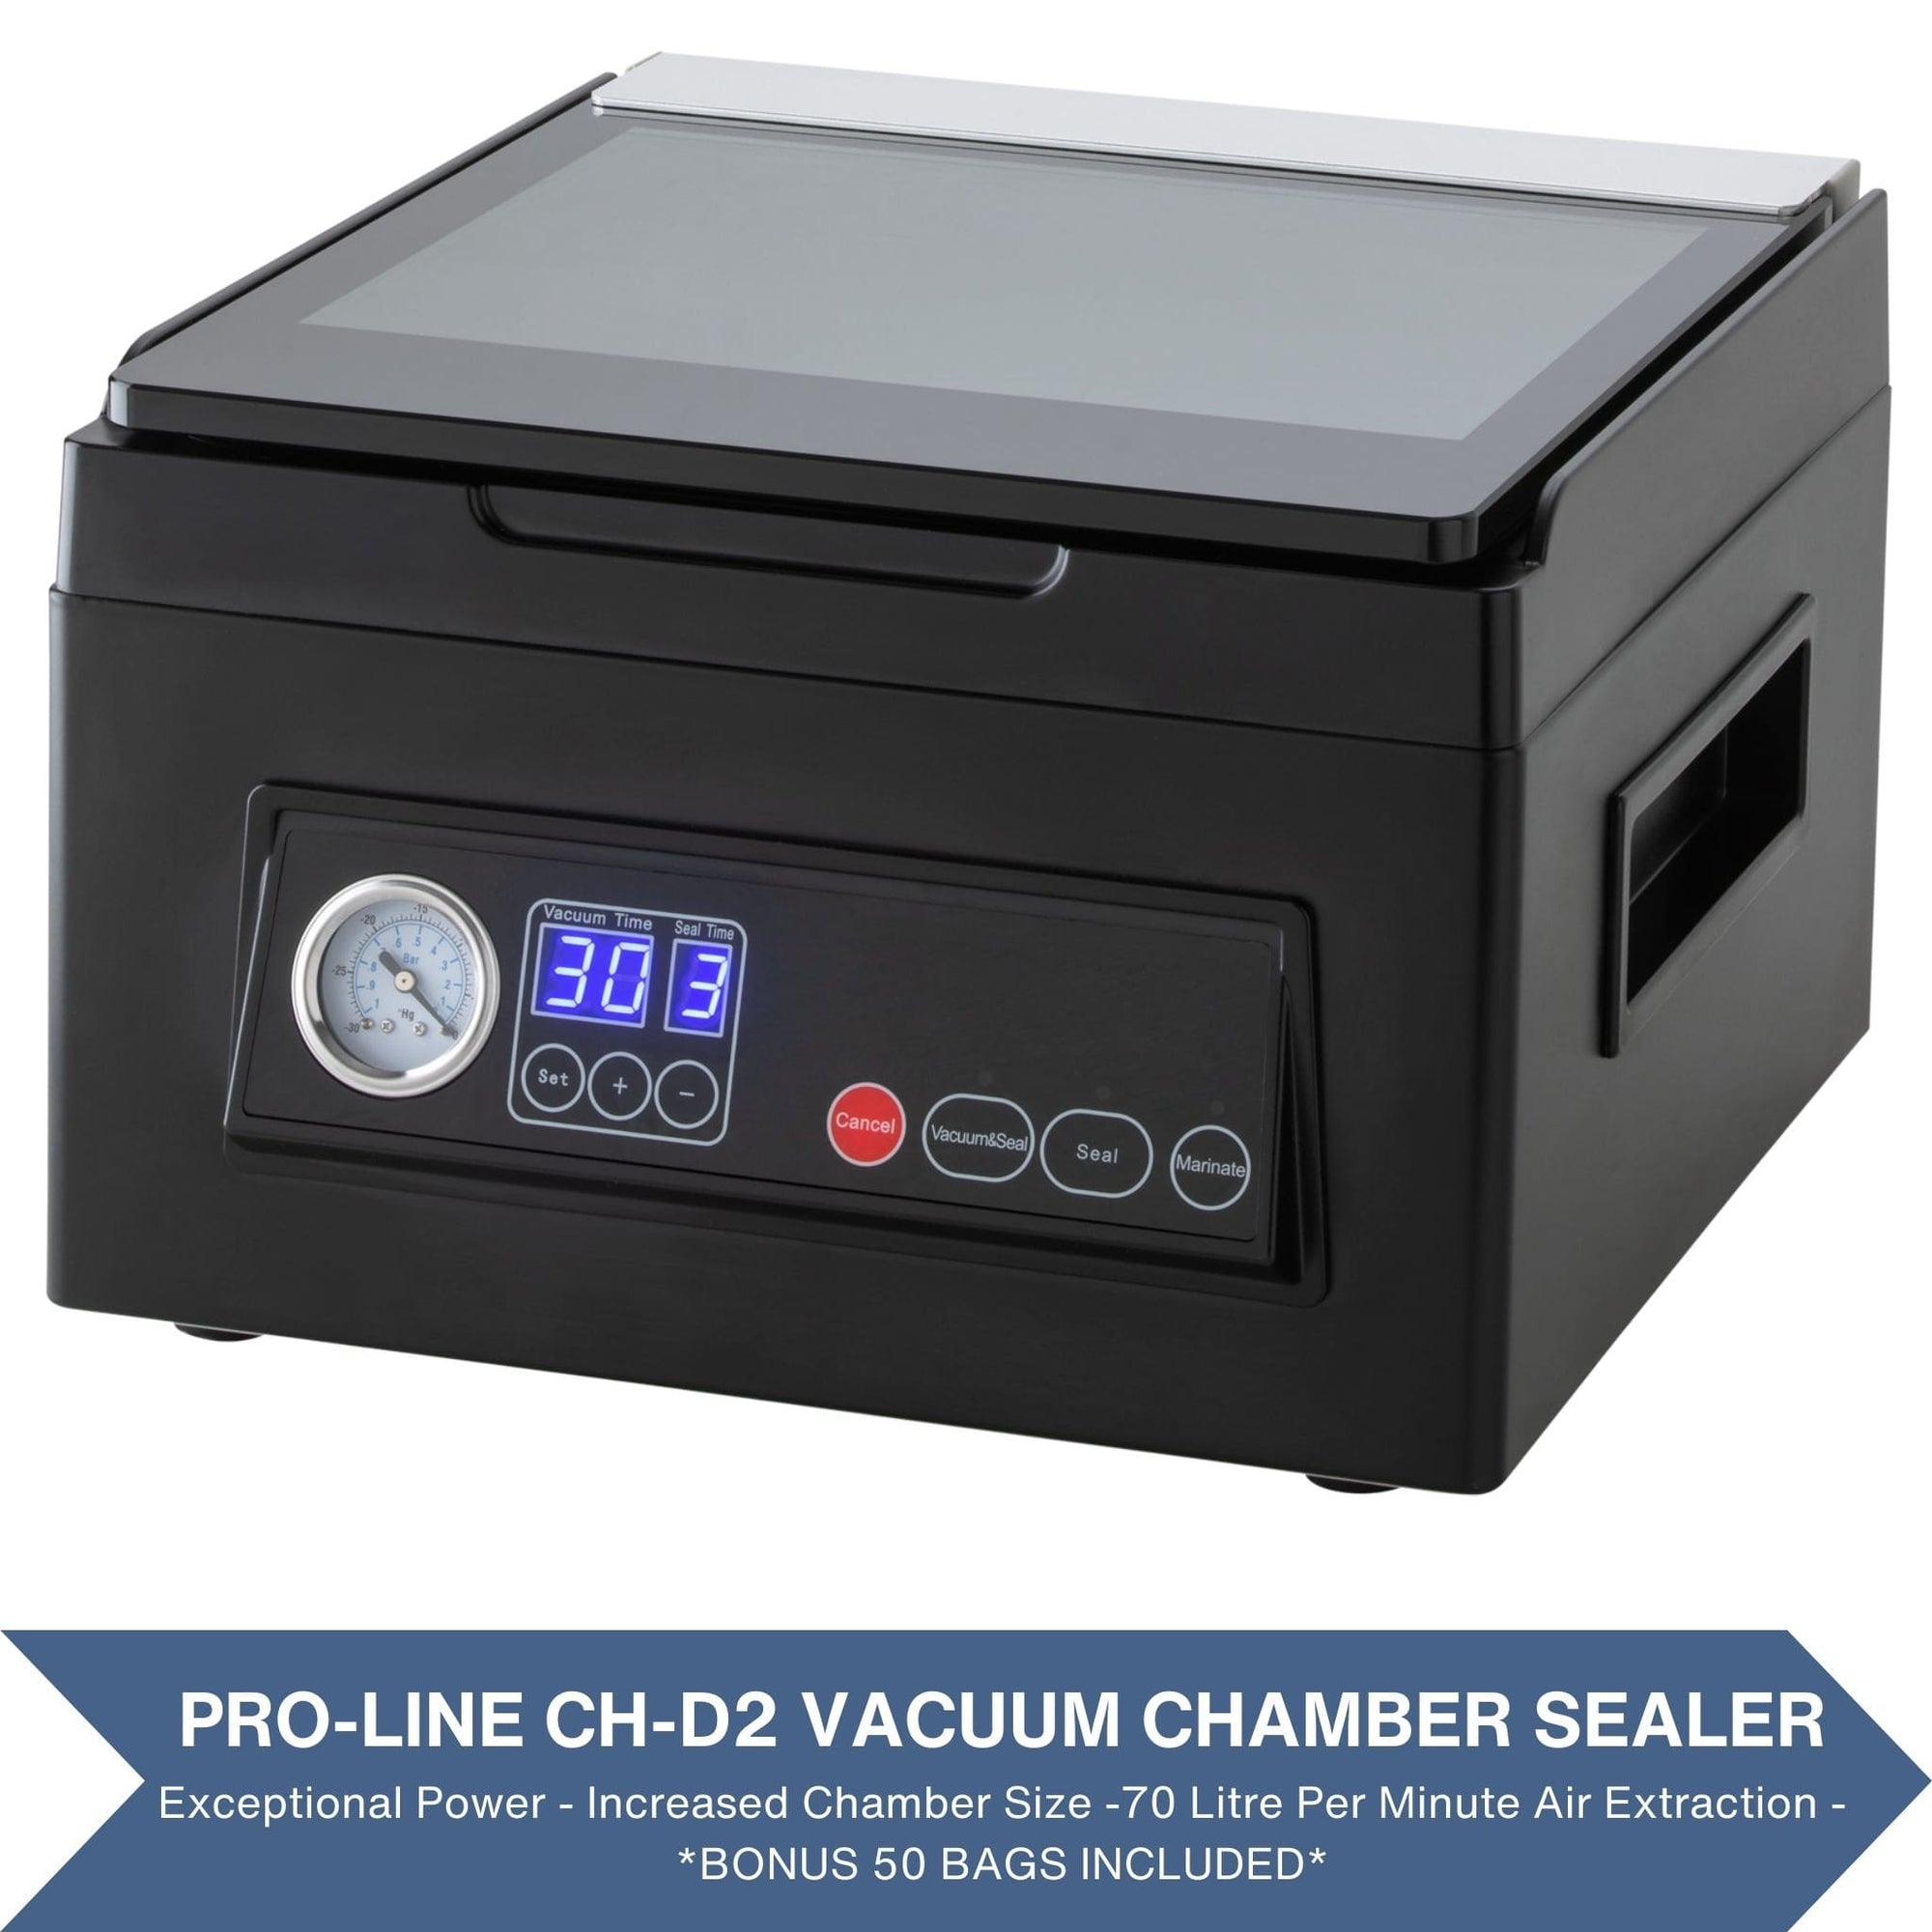 Chamber Vacuum Sealer thoughts and advise